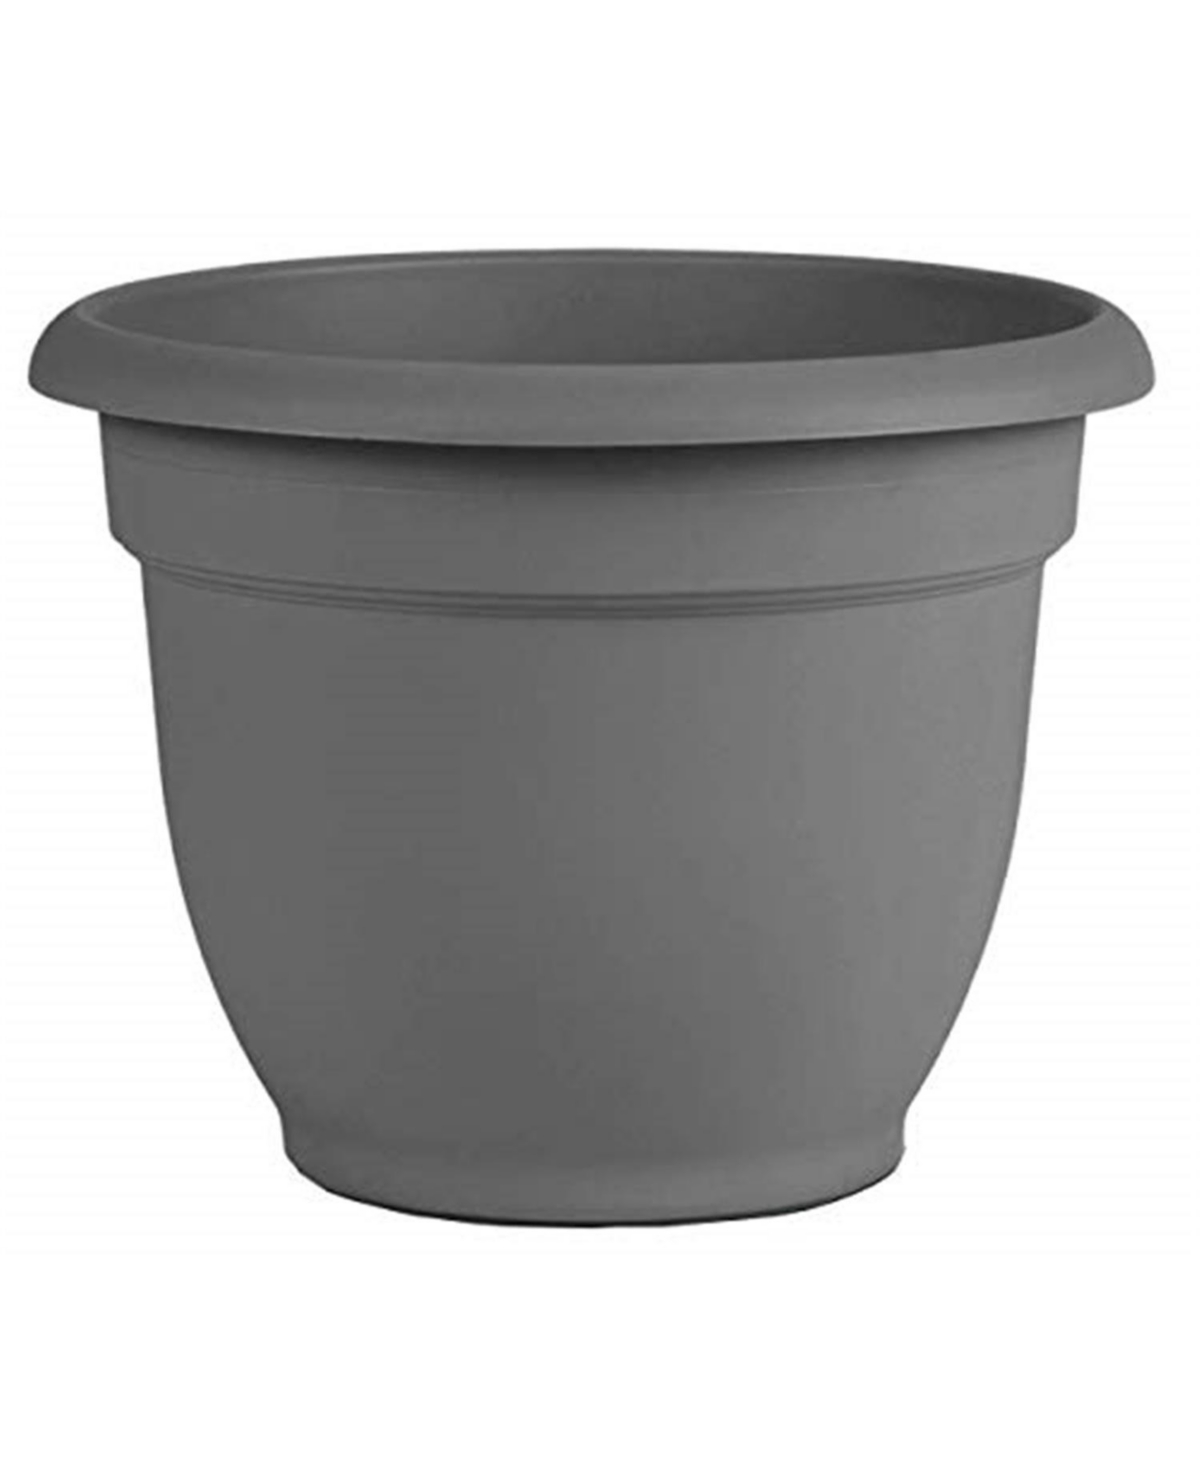 AP08908 Ariana Planter with Self-Watering Disk, Charcoal - 8 inches - Grey